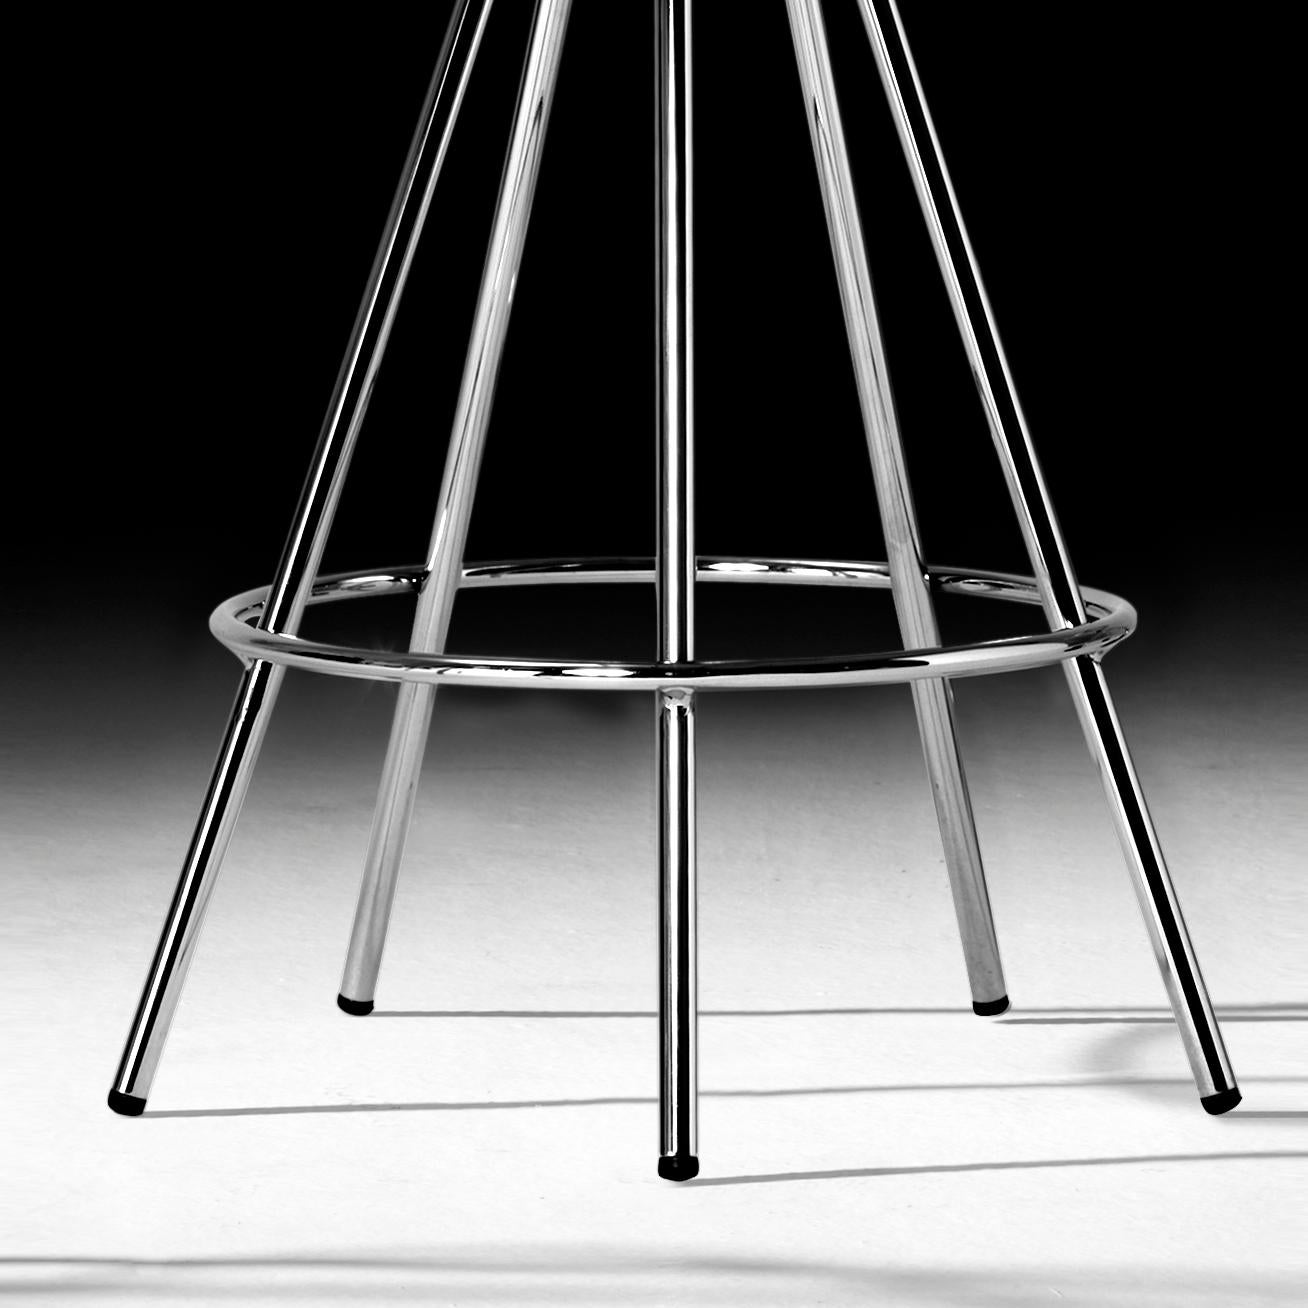 Jamaica stool designed by Pepe Cortes.
Manufactured by BD Barcelona 

The Jamaica stool is already a Classic in Spanish design and is one of the best designed stools in all history. It’s been on the market for over 25 years and remains as current